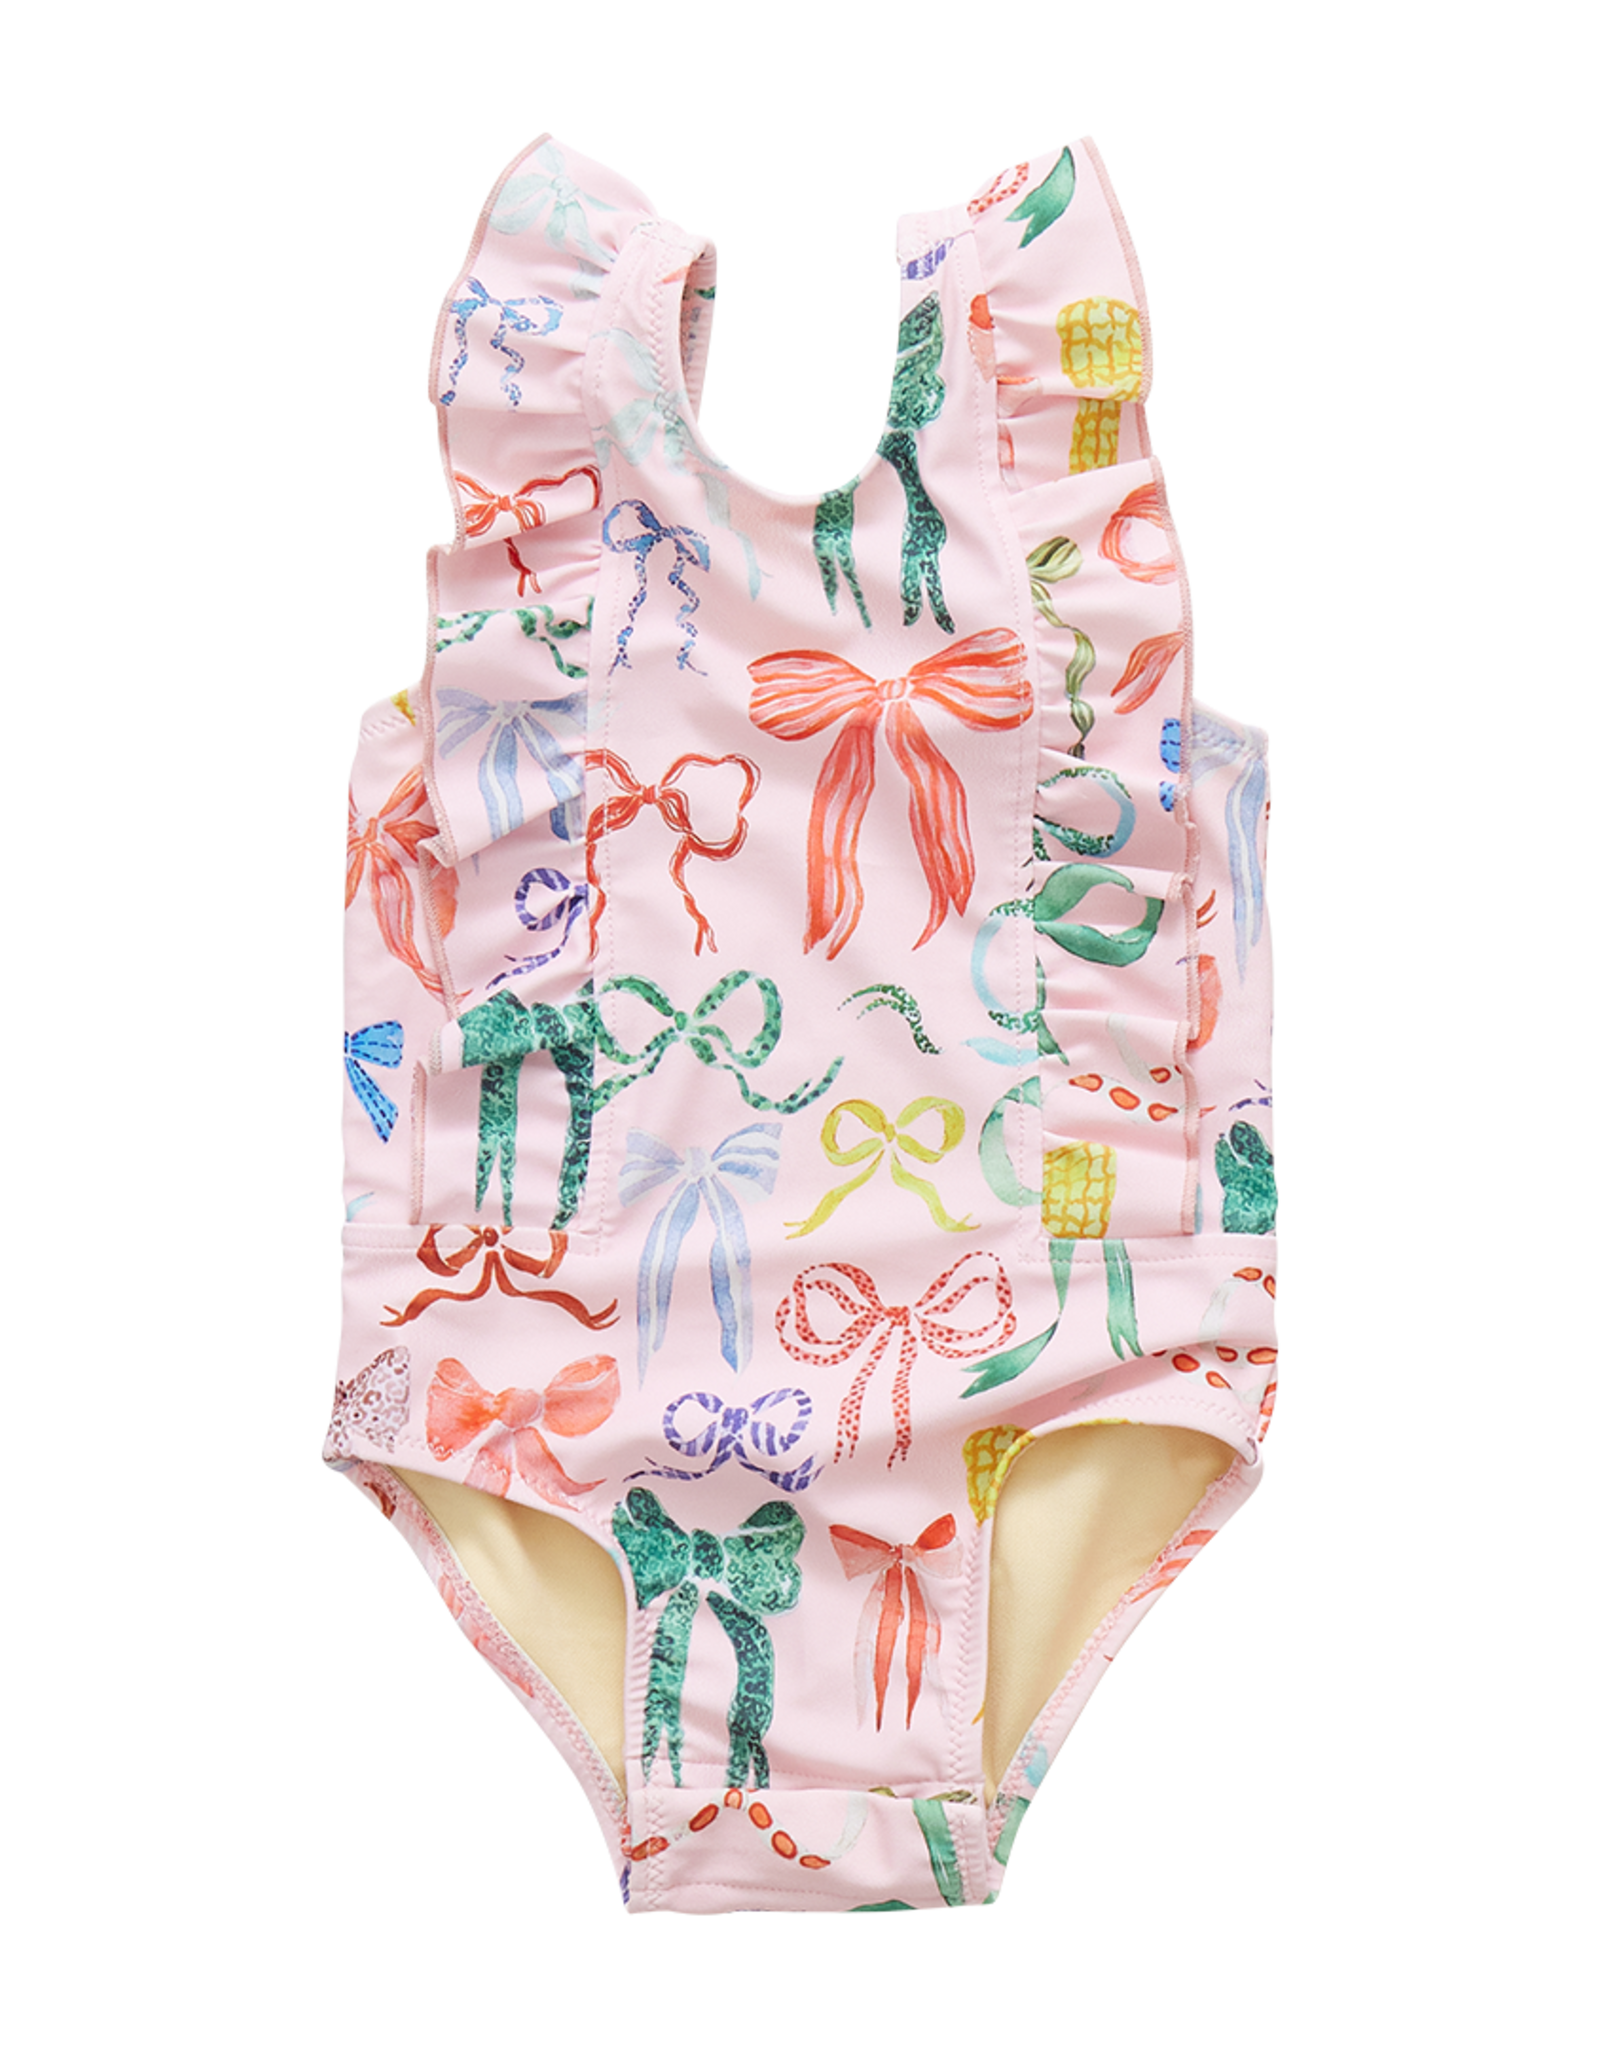 Pink Chicken Swimwear drop is full of bright beautiful colors and florals  in sizes 2-8 a few have matching infant styles #springbreak…